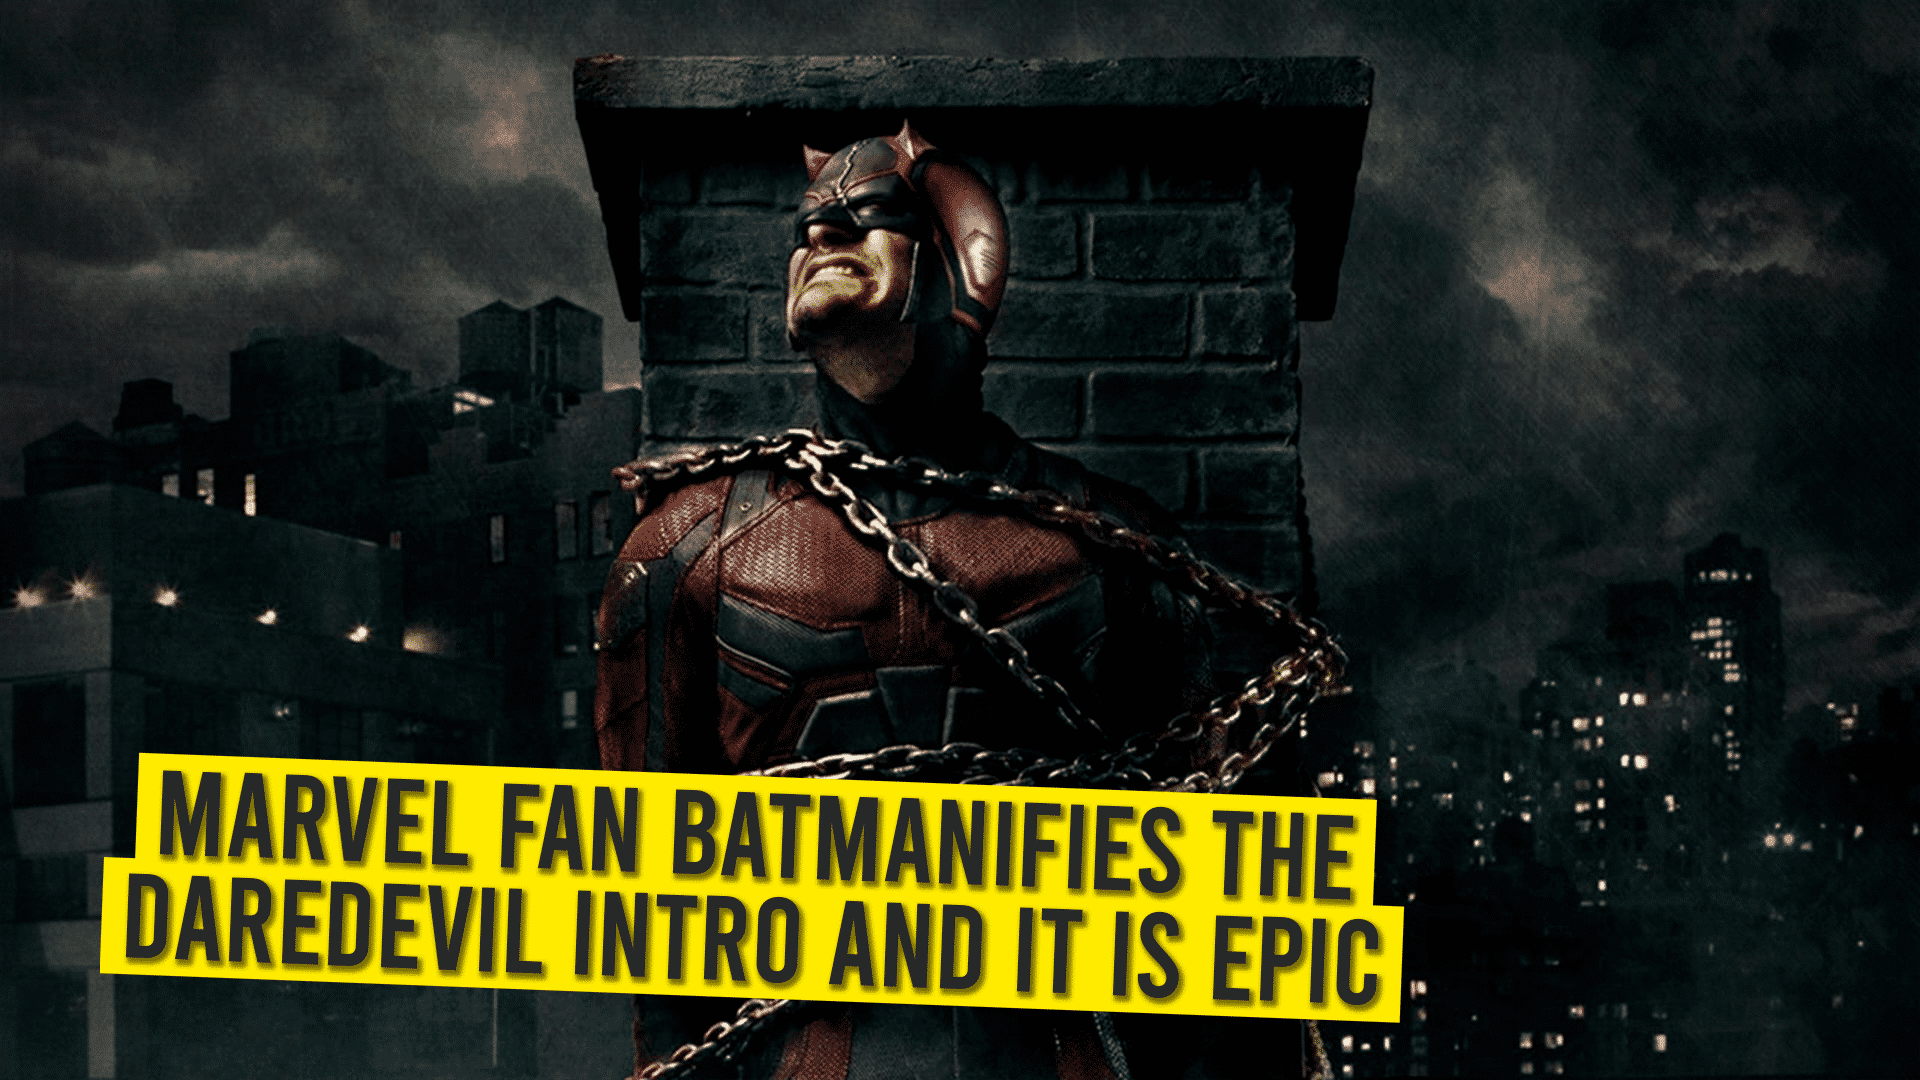 Marvel Fan Batmanifies the Daredevil Intro And It Is Epic